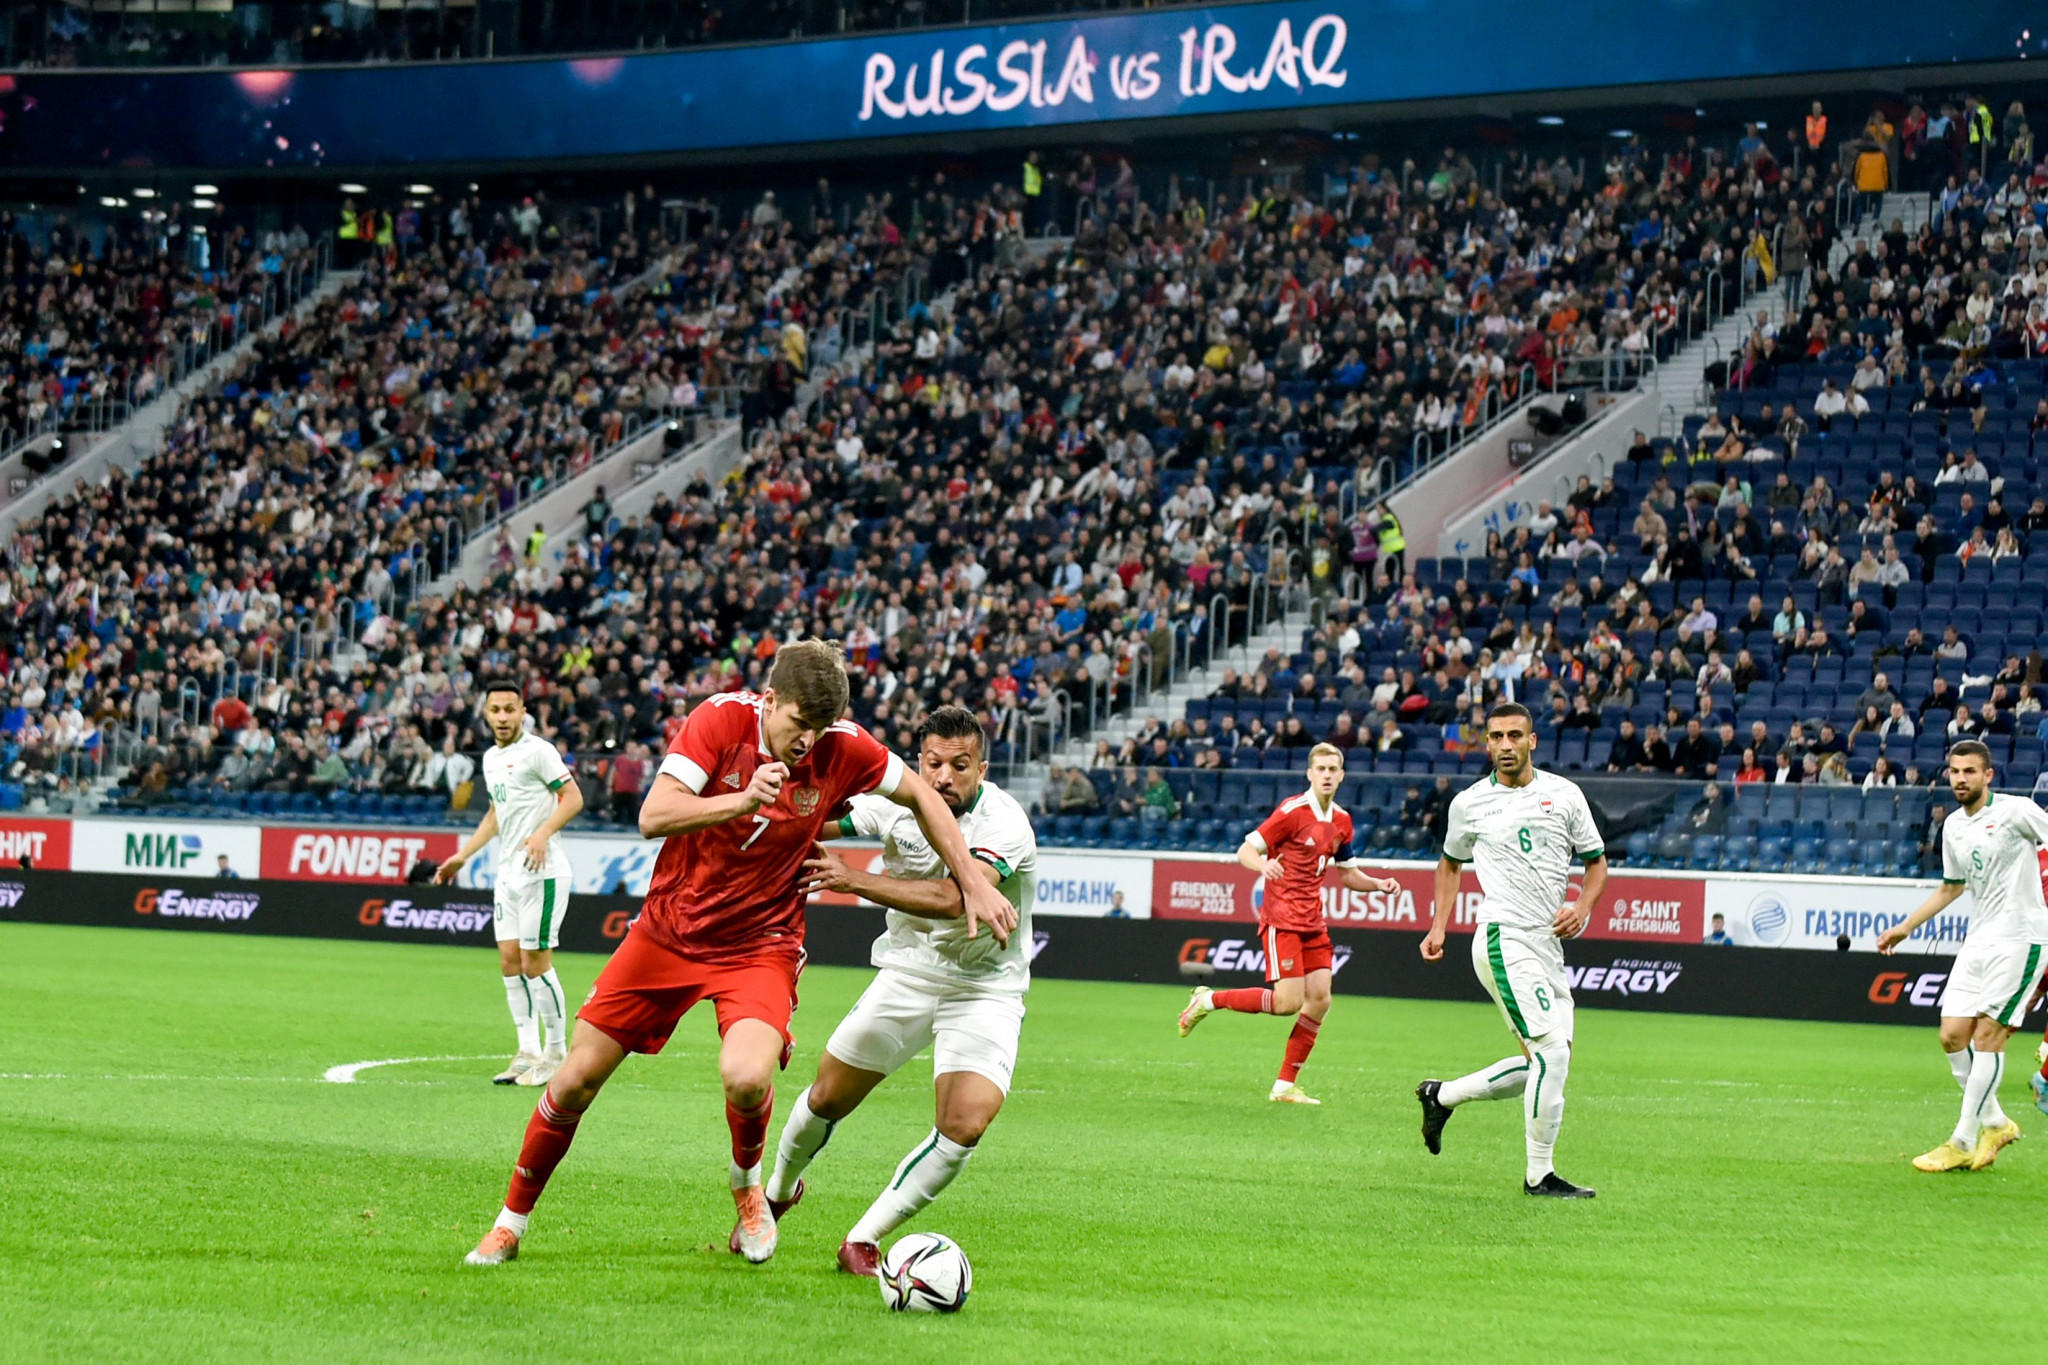 Russia take victory over Iraq in first home match since 2021